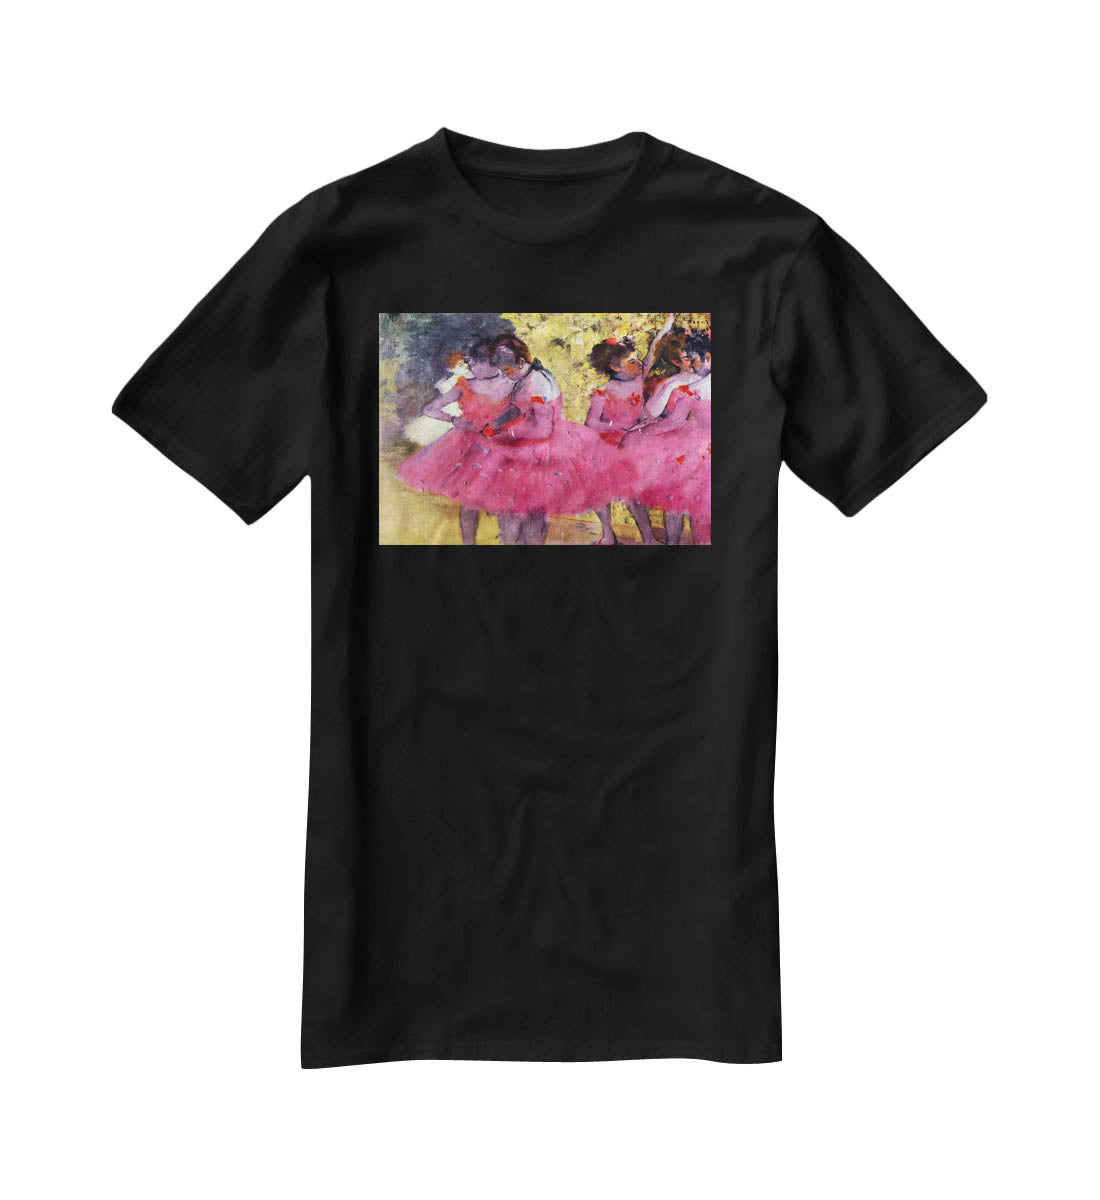 Dancers in pink between the scenes by Degas T-Shirt - Canvas Art Rocks - 1